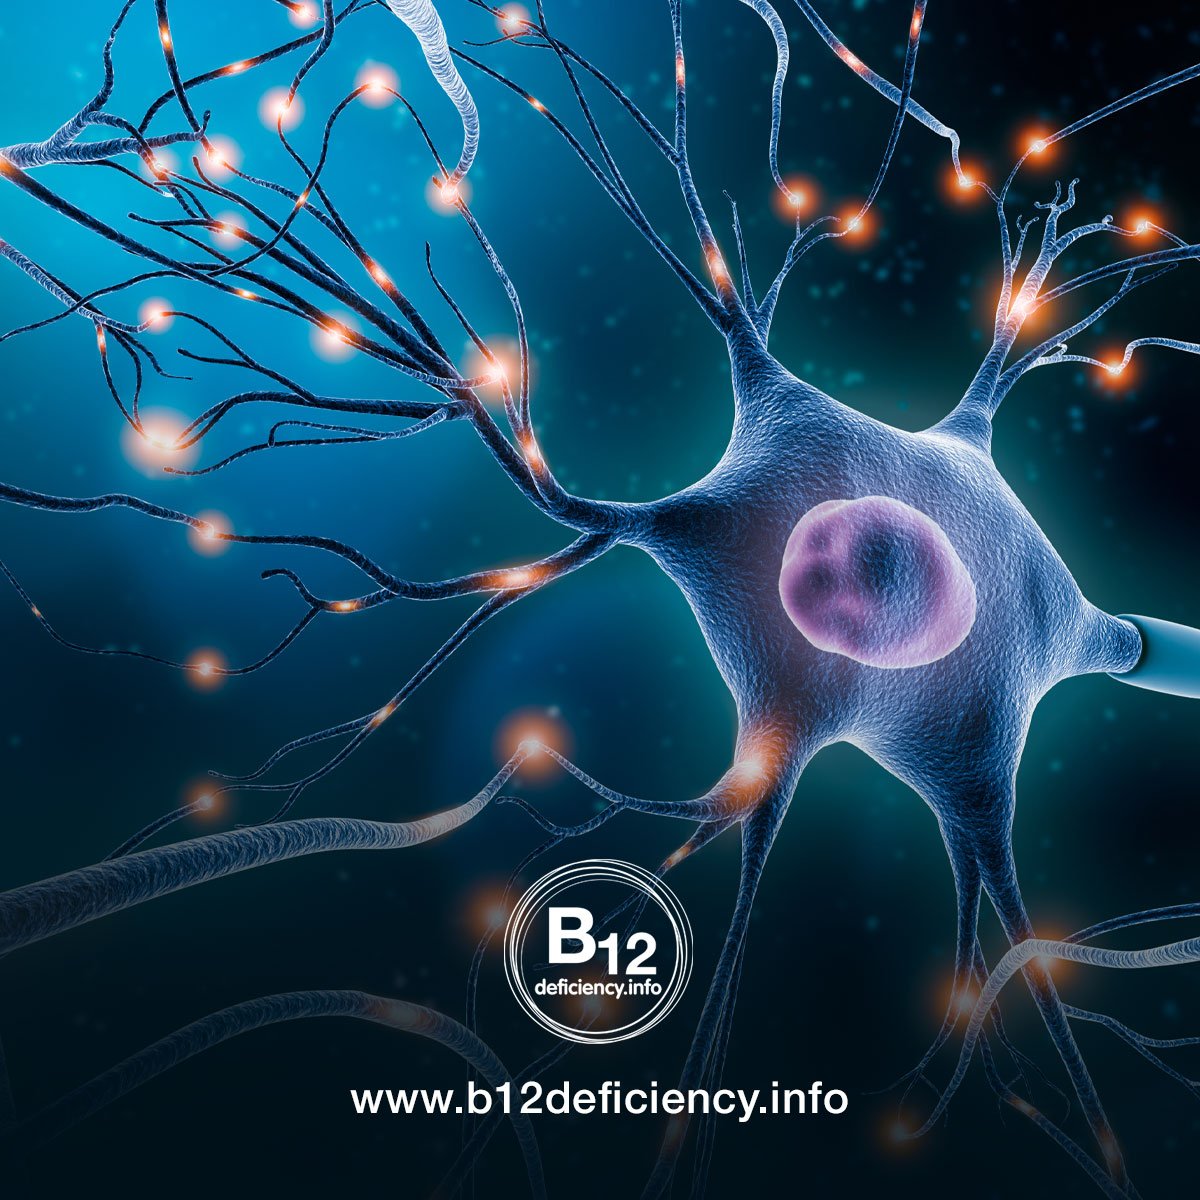 Neurological symptoms in B12 deficiency are routinely ignored.